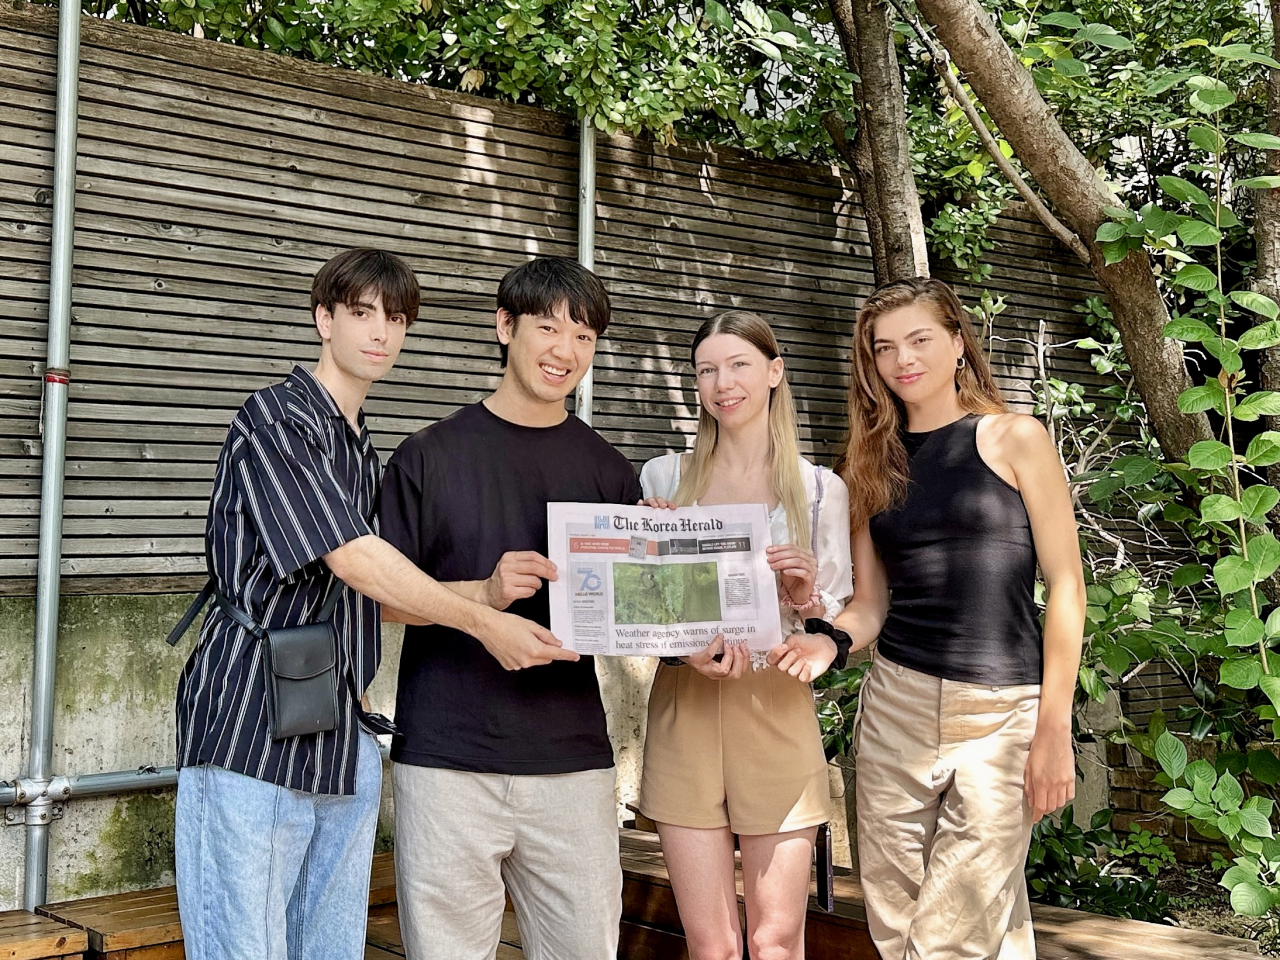 Pohim Tam (second from left) holds a copy of The Korea Herald with his friends, Evans Becker (first from left), Hailey Kellum (third from left) and Rachel Millet (fourth from left). (Courtesy of Pohim Tam)